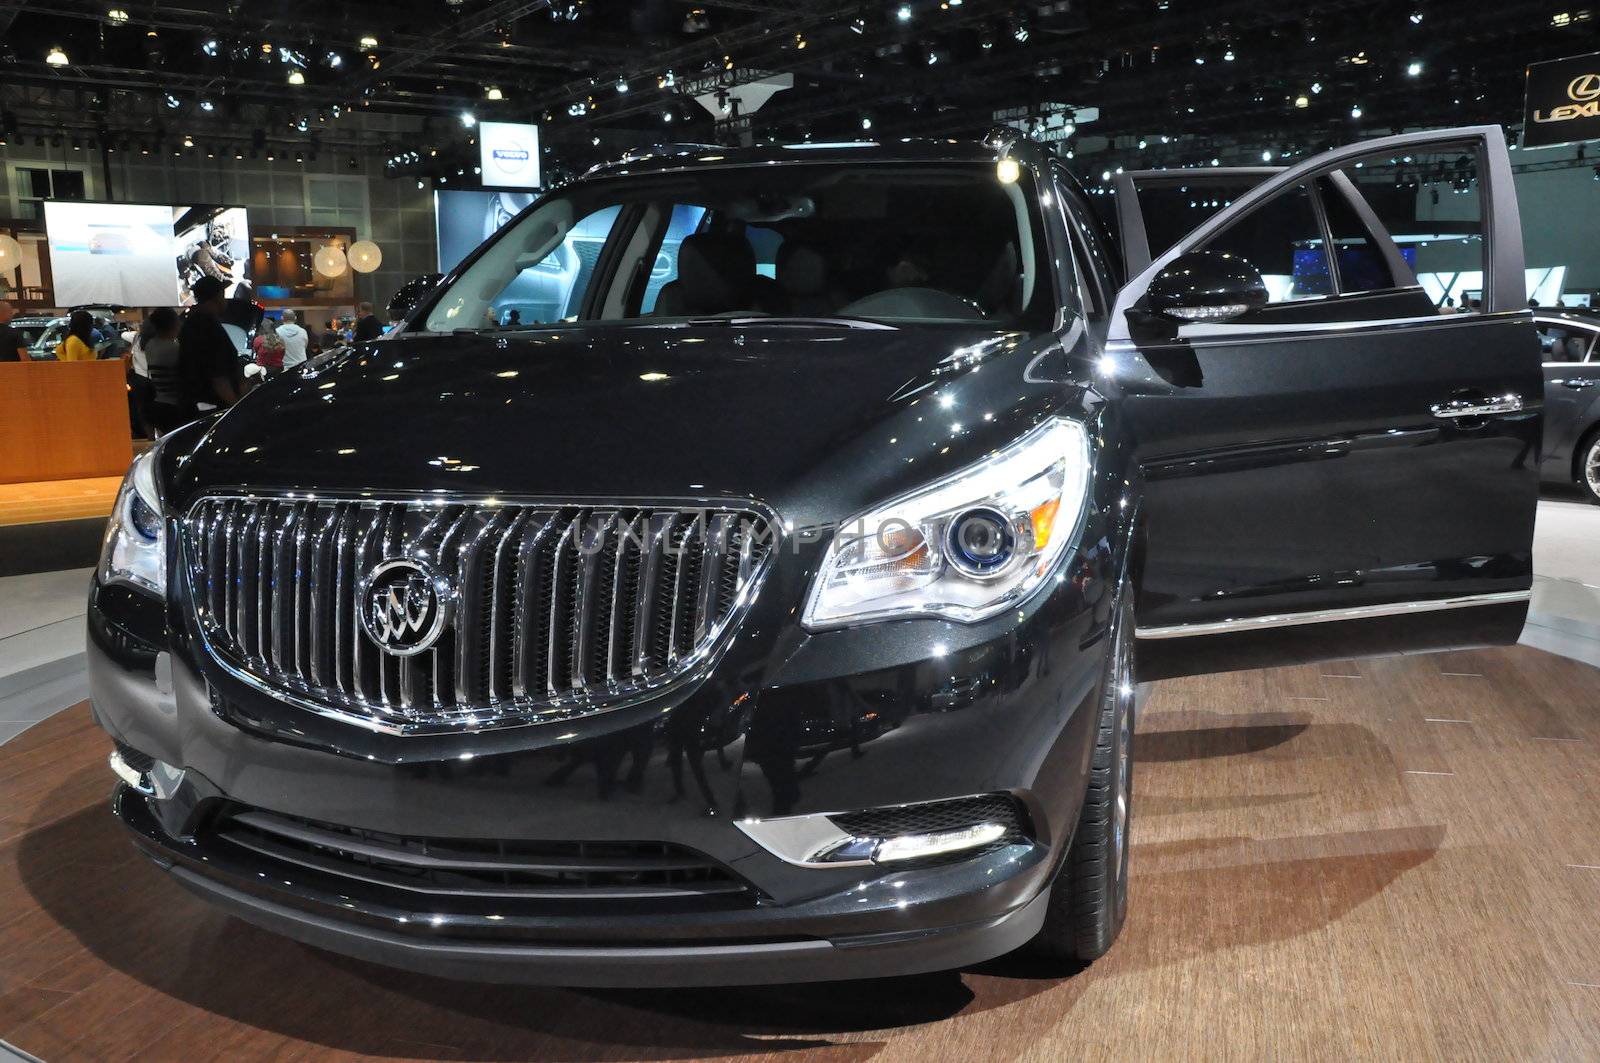 Buick Enclave at Auto Show